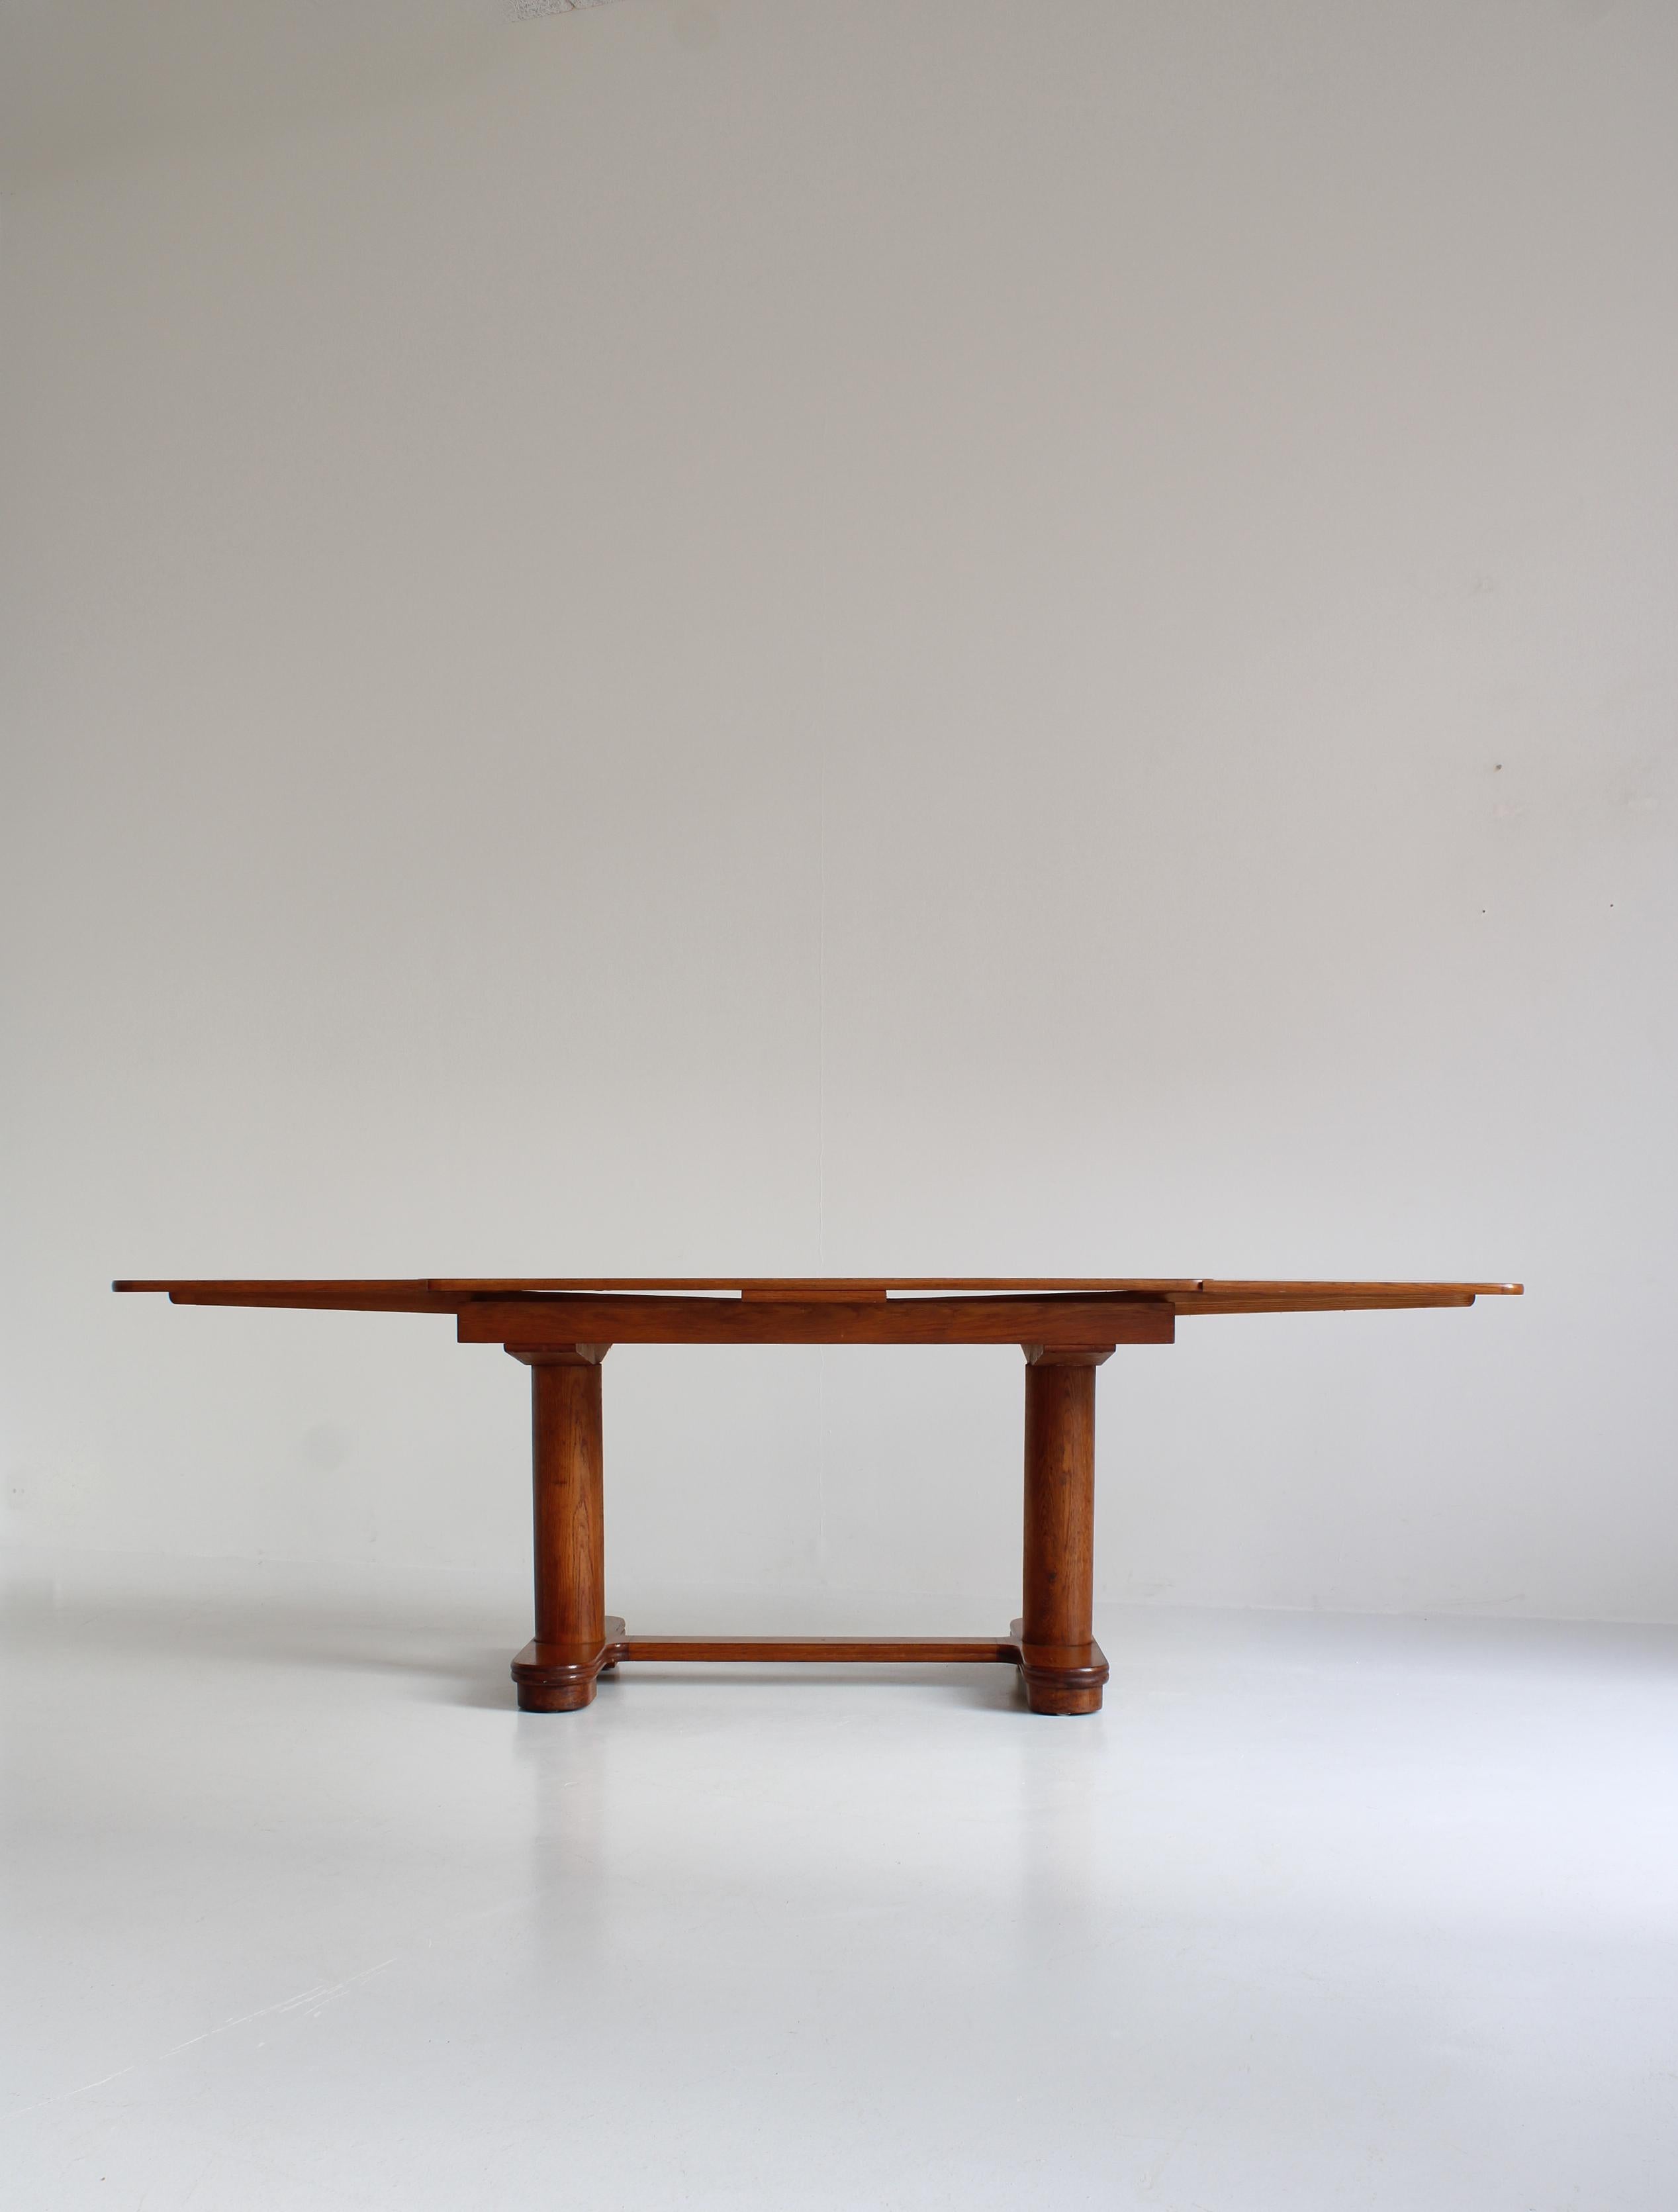 Art Deco Table by Danish Cabinetmaker in Patinated Oak, 1930s For Sale 9